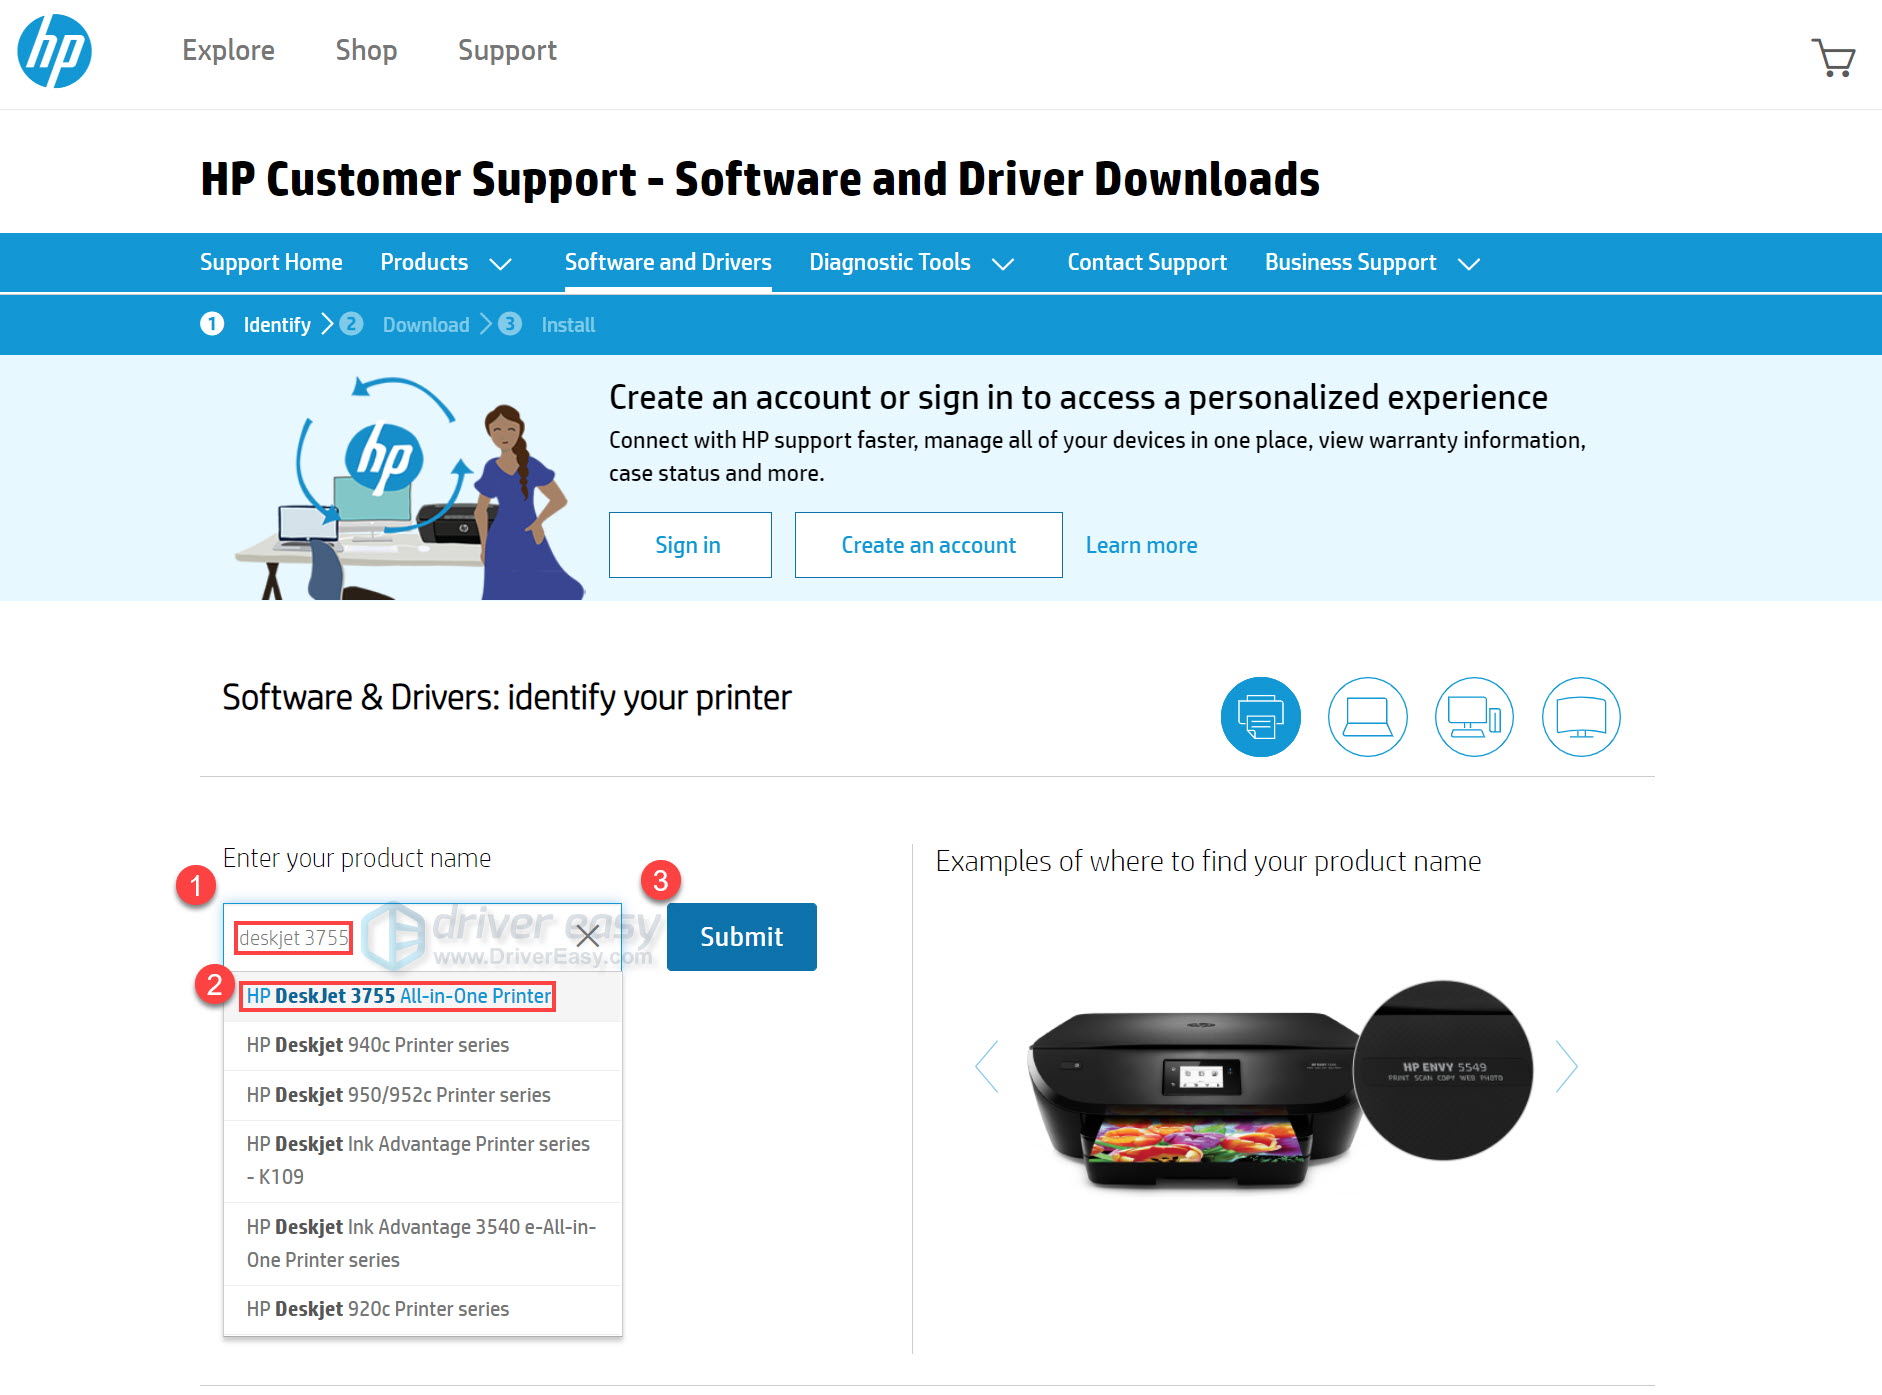 download HP Deskjet 3755 all-in-one printer driver manually